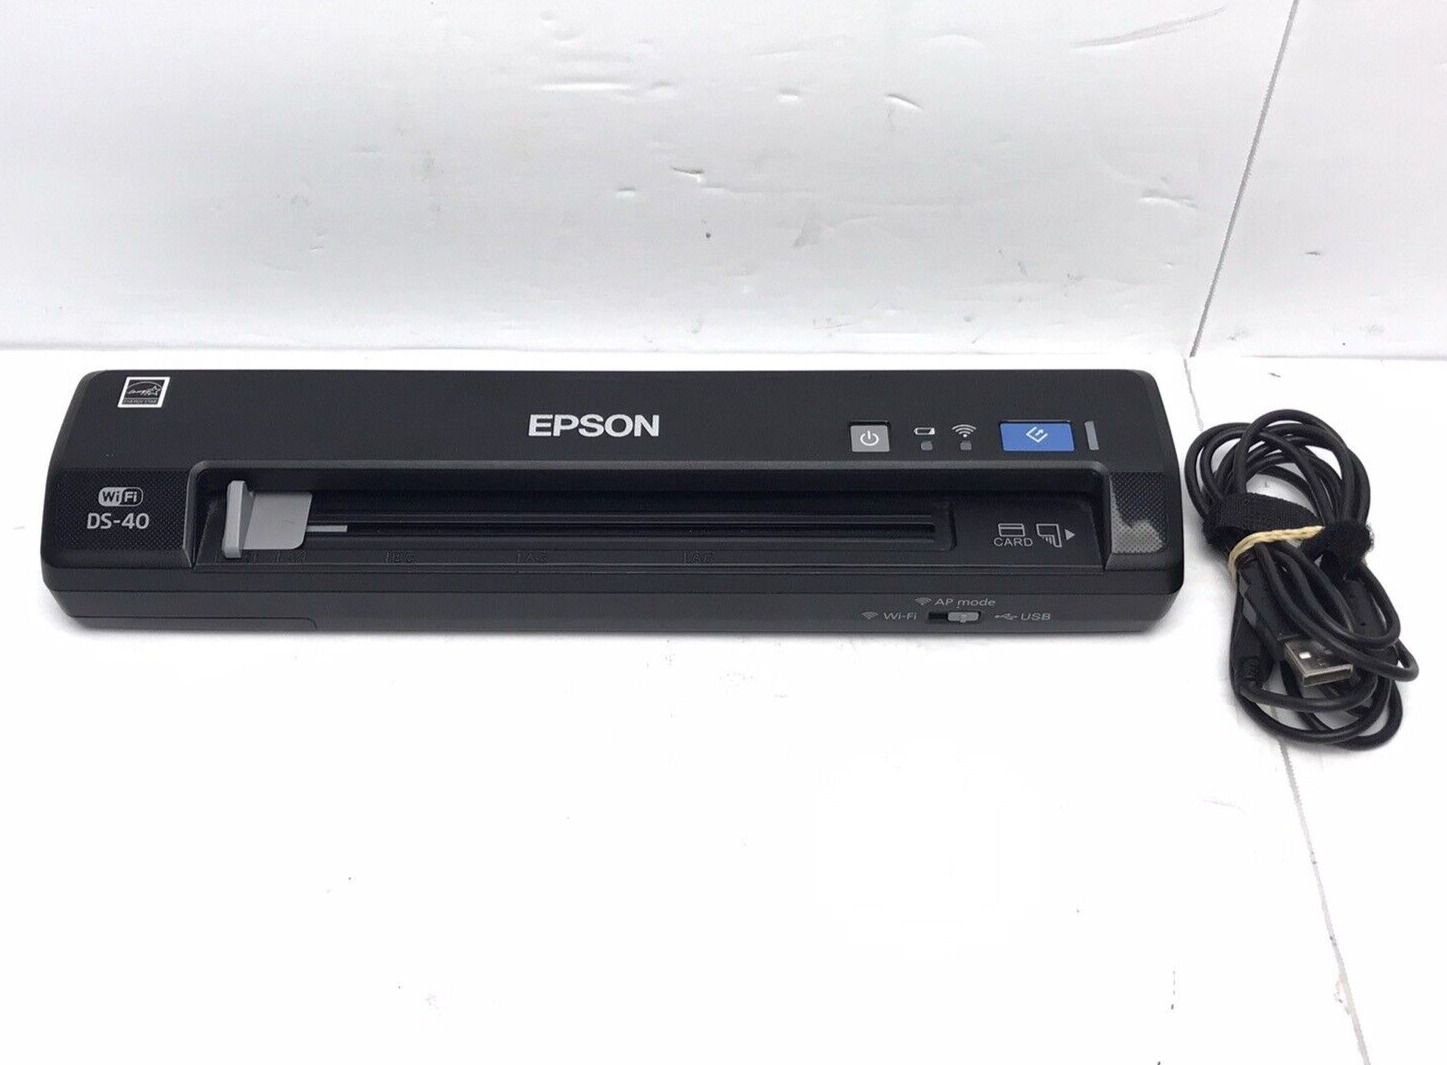 Epson WorkForce DS-40 Portable Document Scanner Battery Powered - No Power Cord